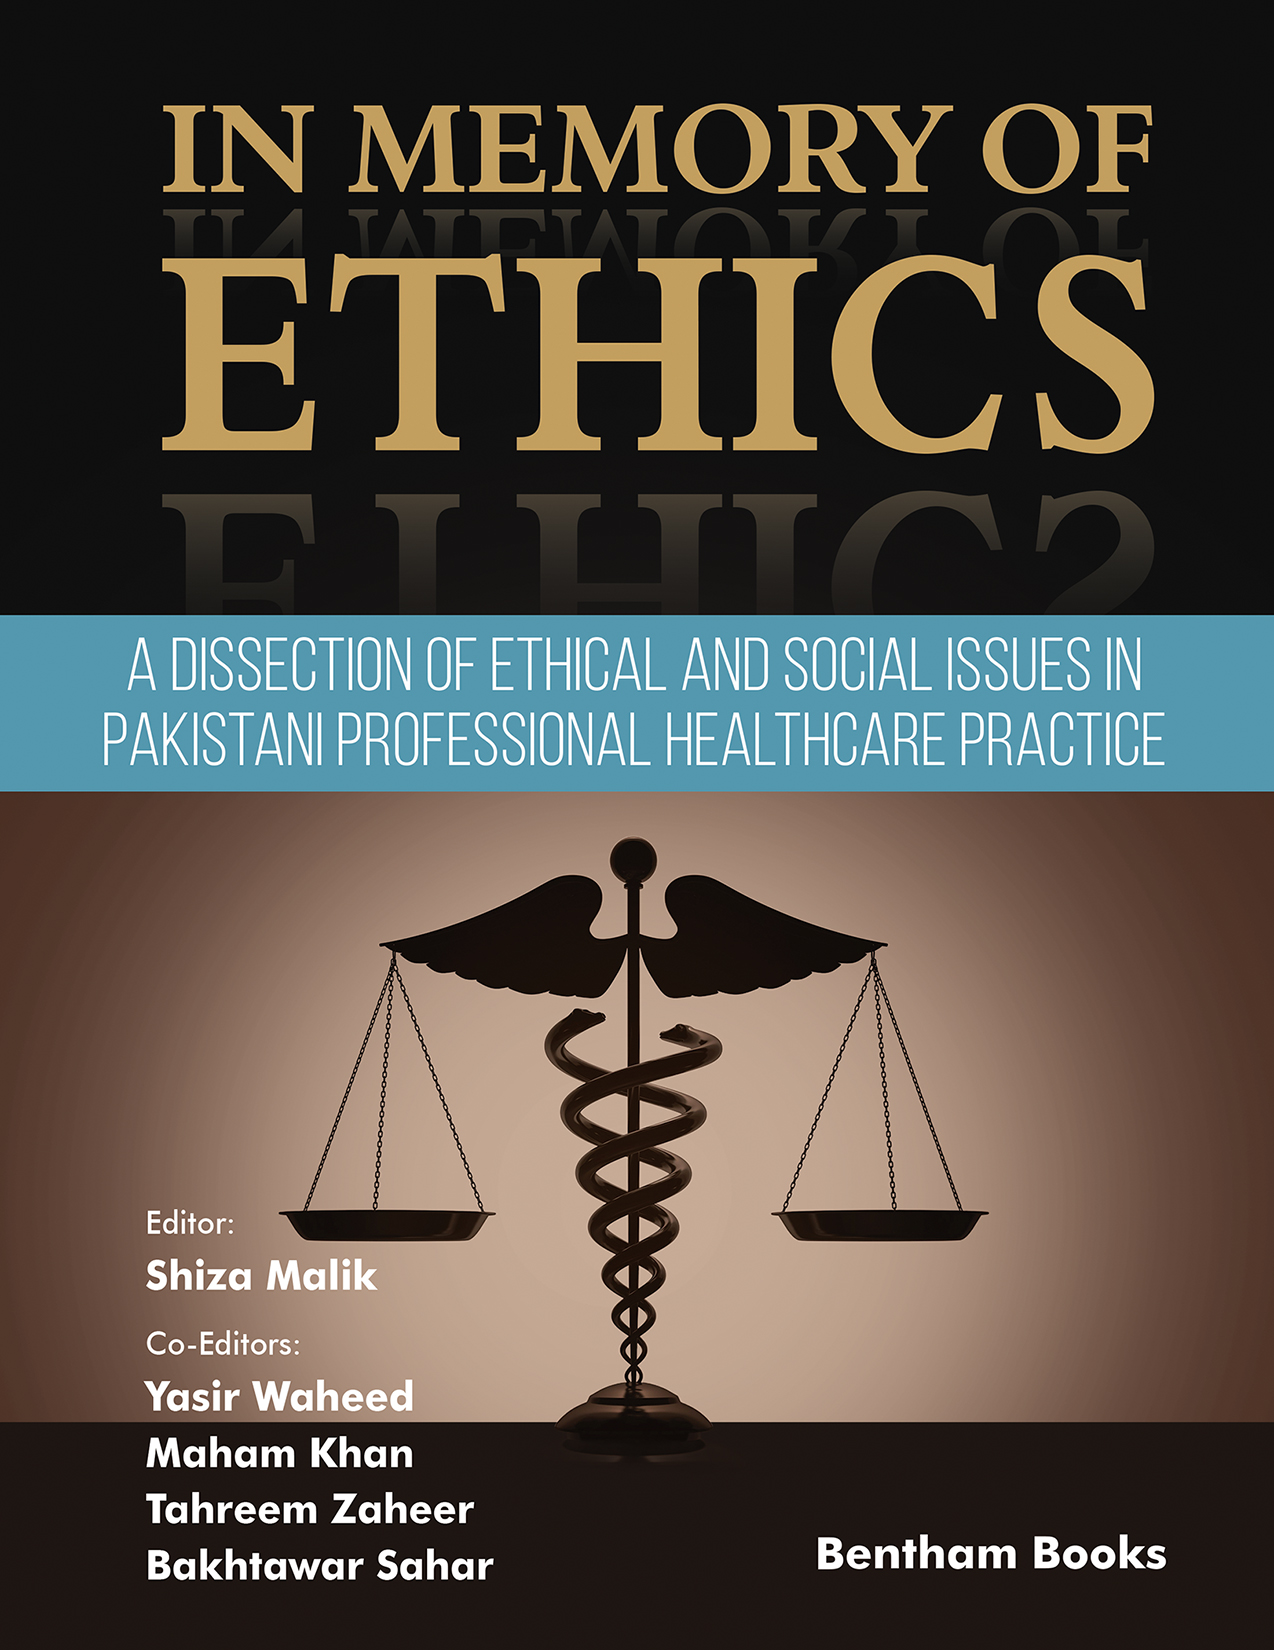 In Memory of Ethics: A Dissection of Ethical and Social Issues in Pakistani Professional Healthcare Practice